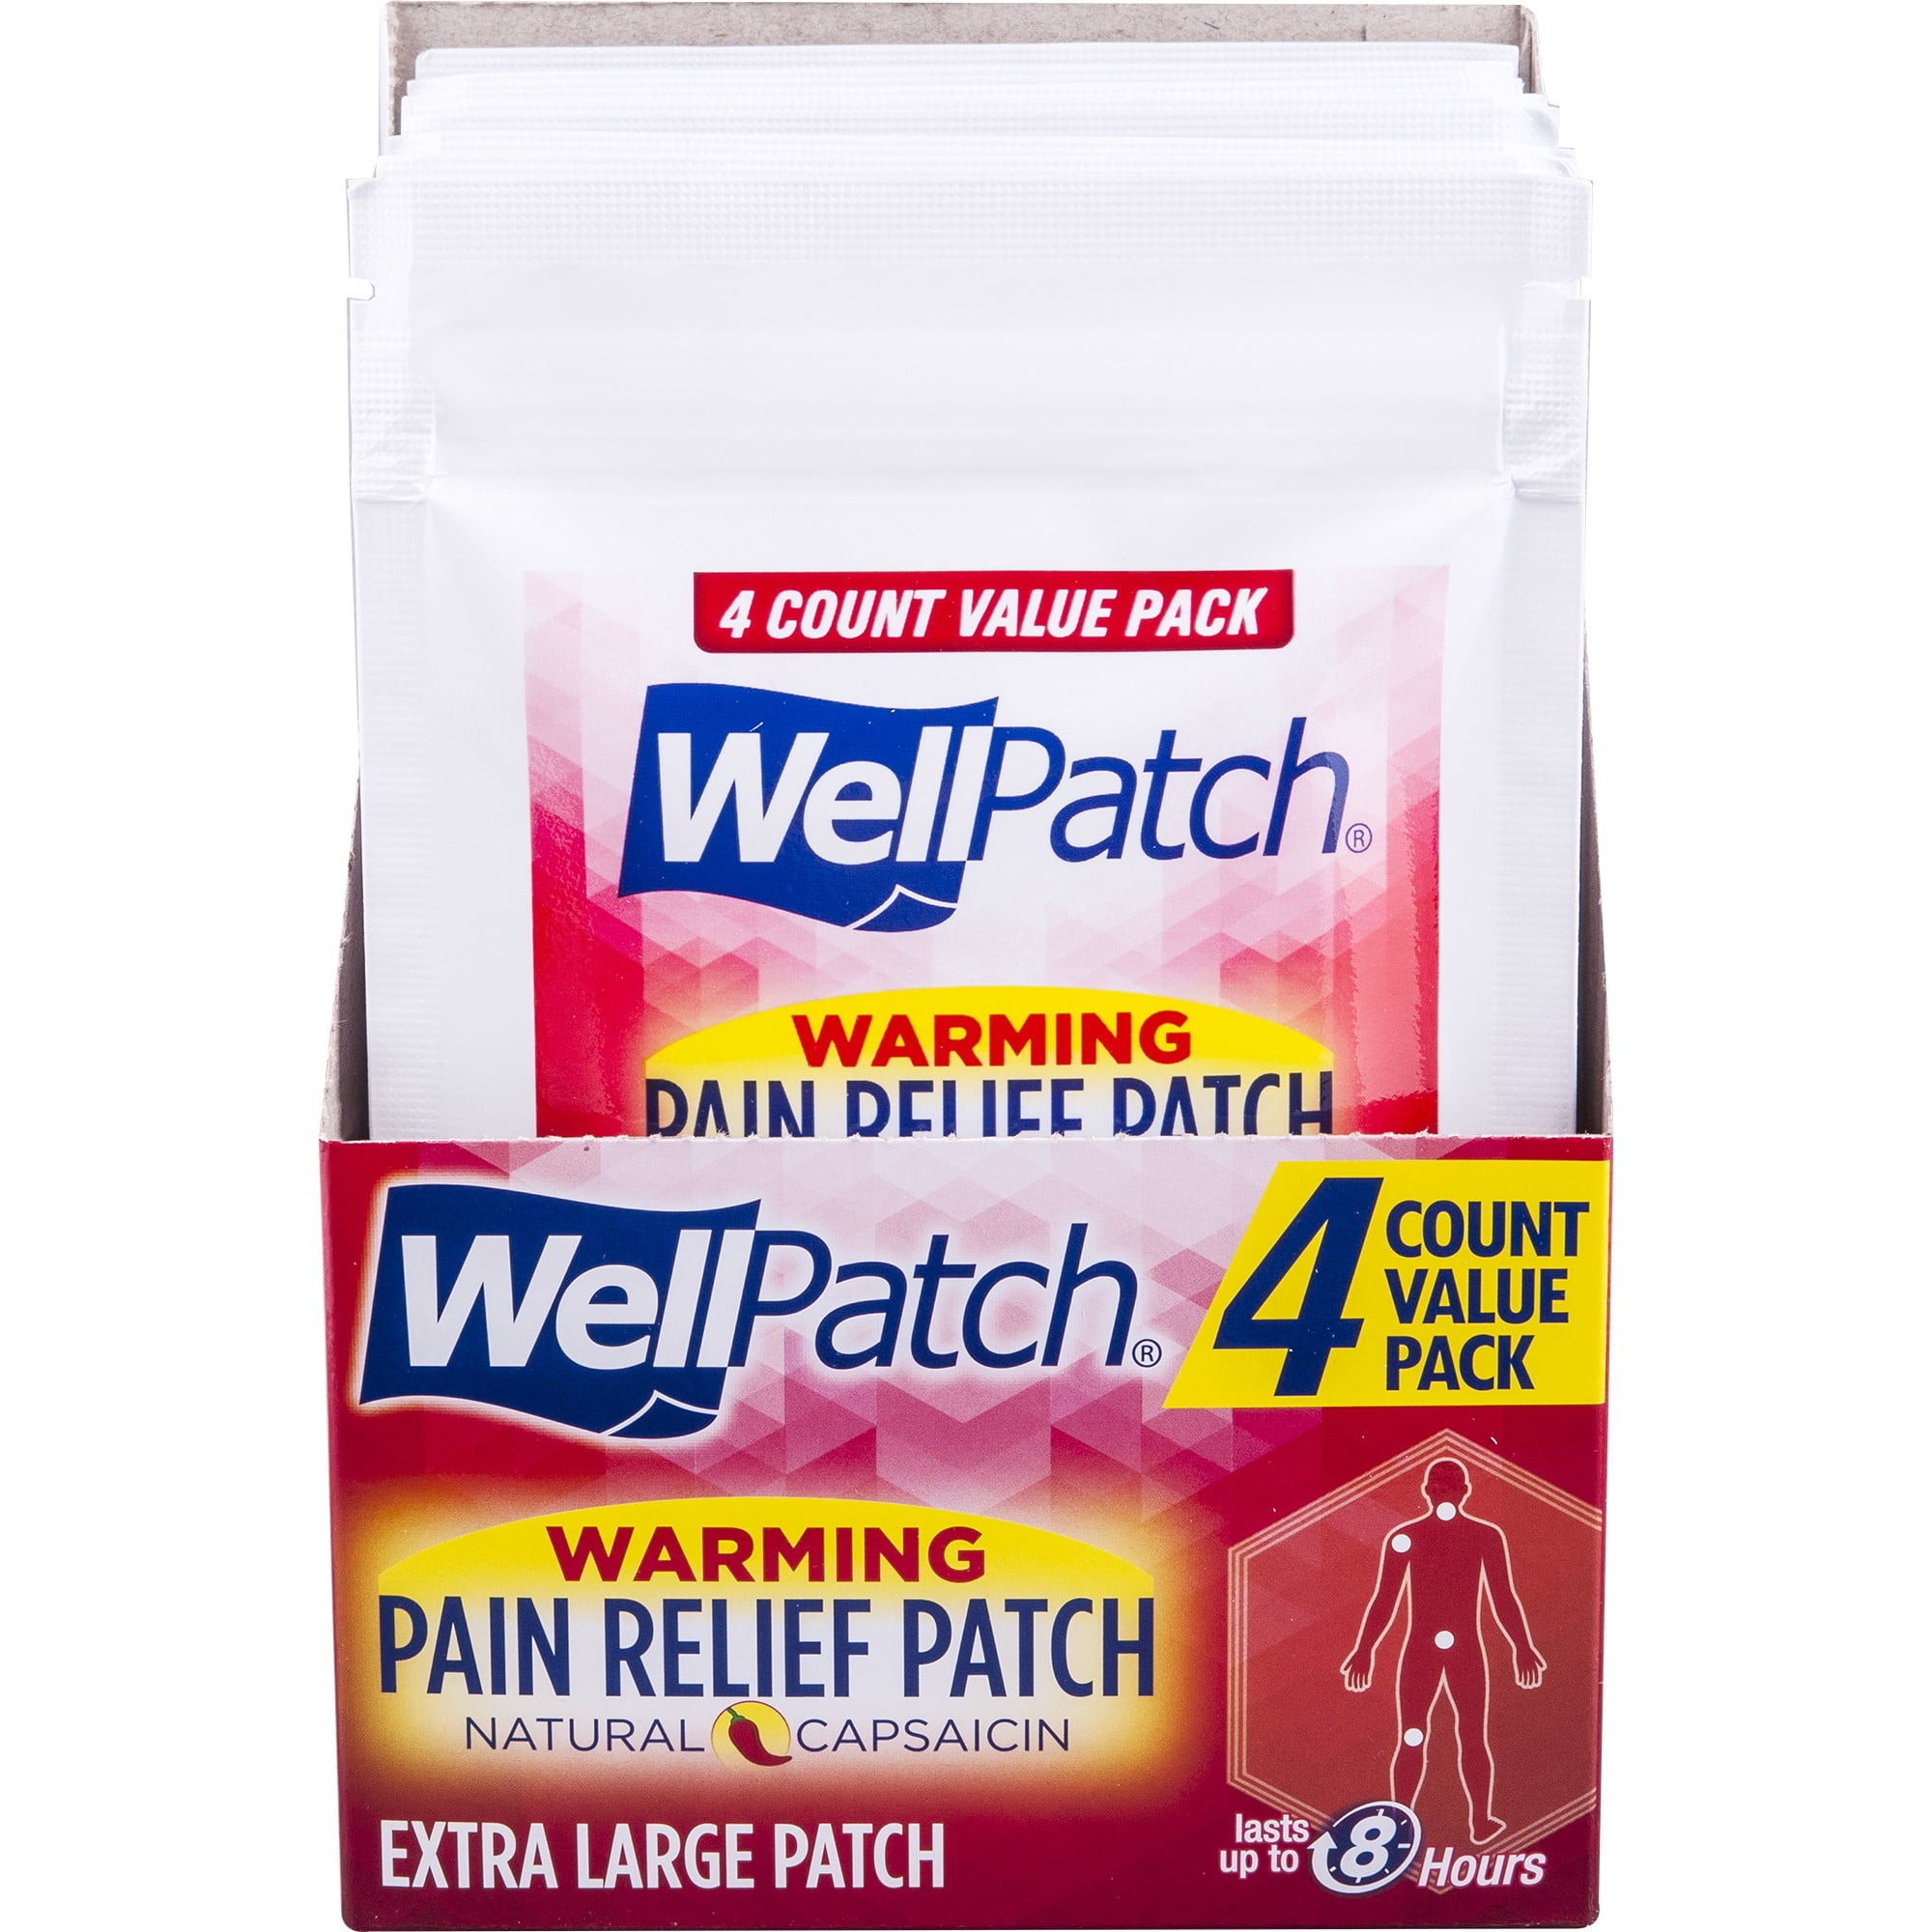 WellPatch DeepHeating Pain Relief Patch, 1 ea 